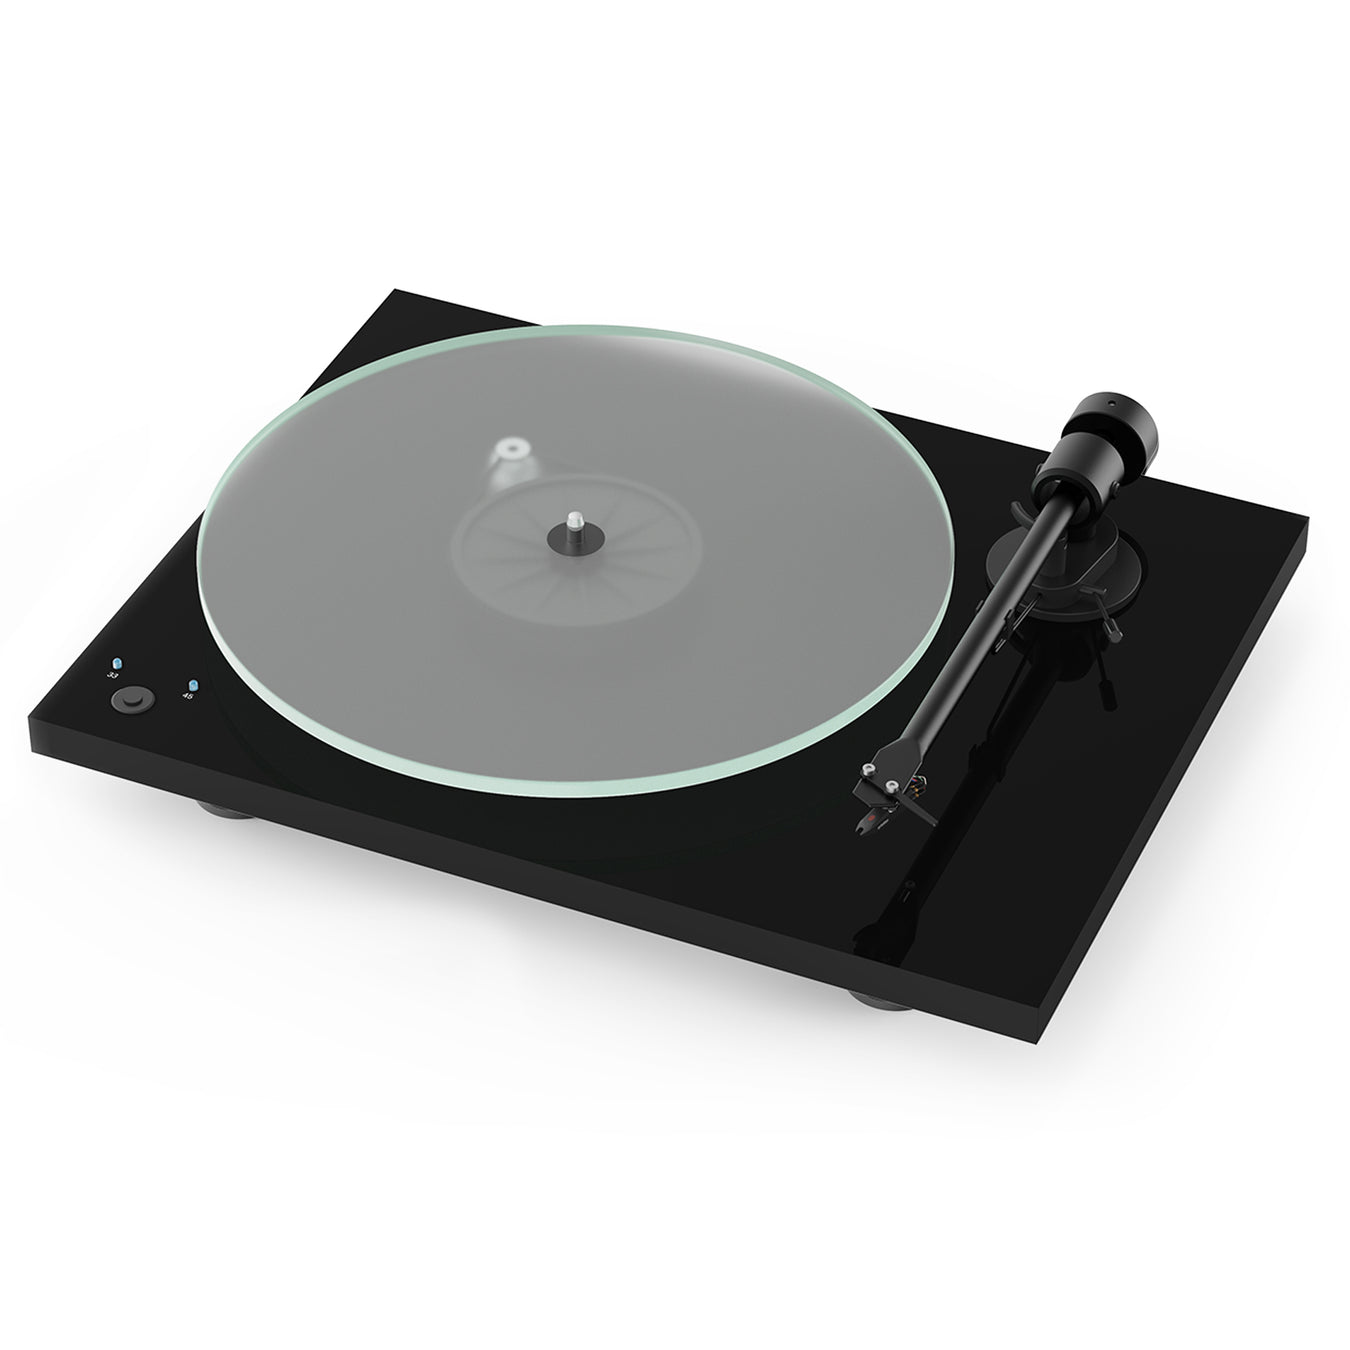 📊 Pro-Ject Turntable Model Review Guide - TTL Levels